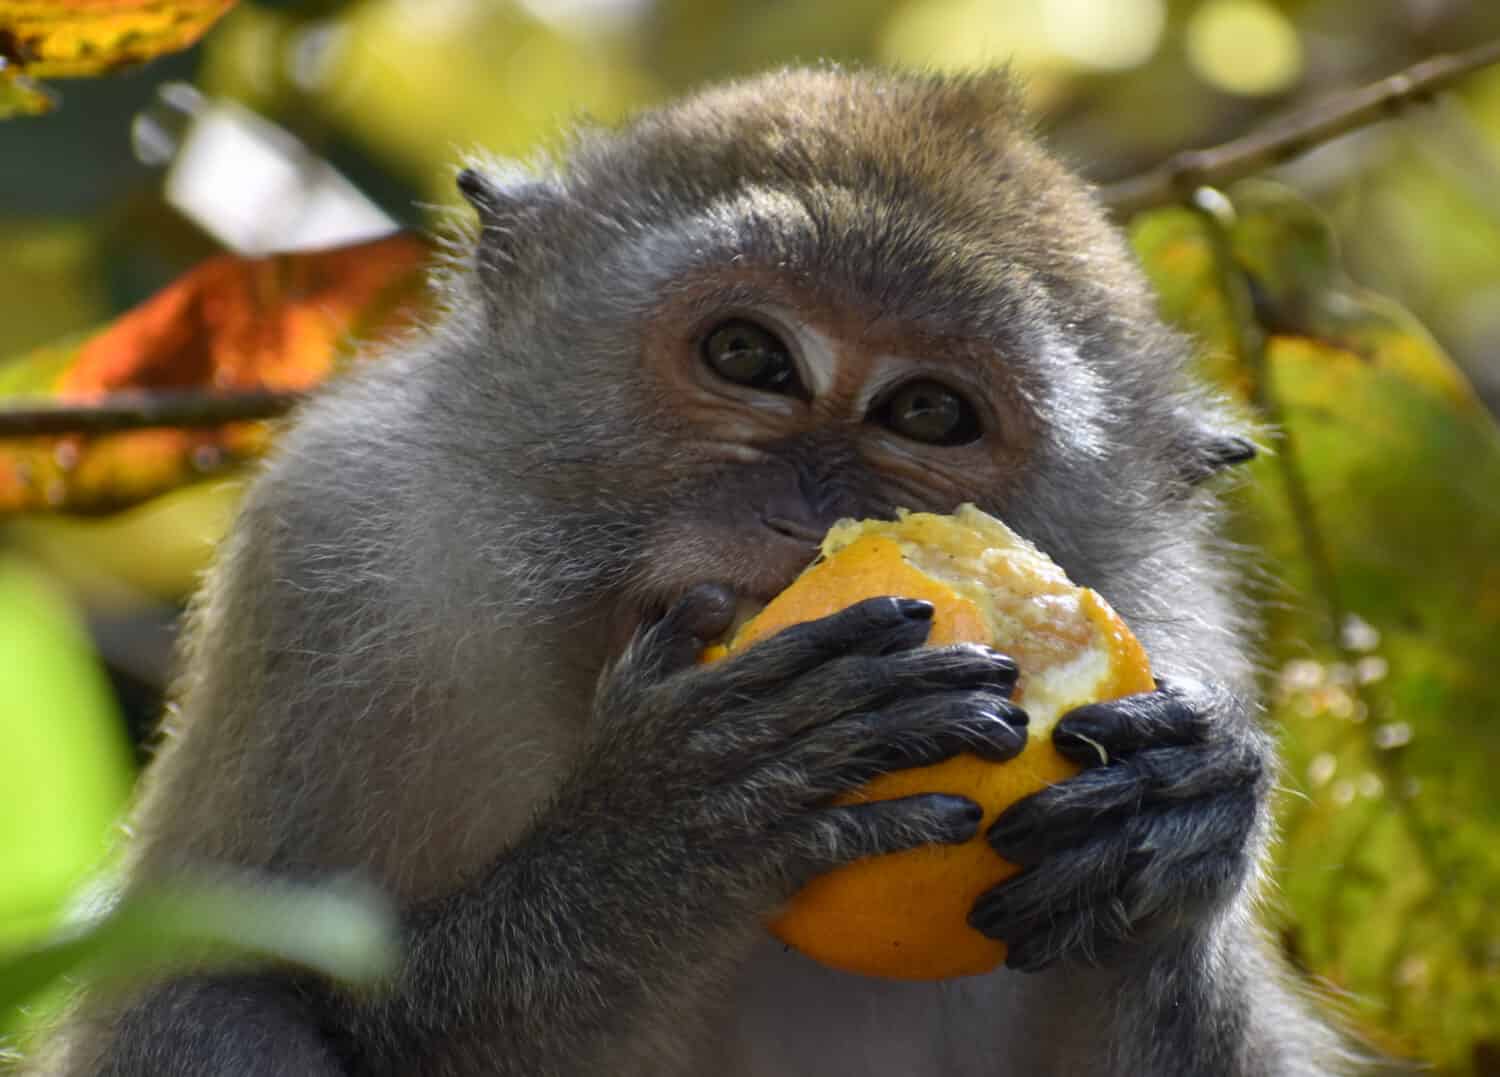 Close up of a macaque monkey eating an orange